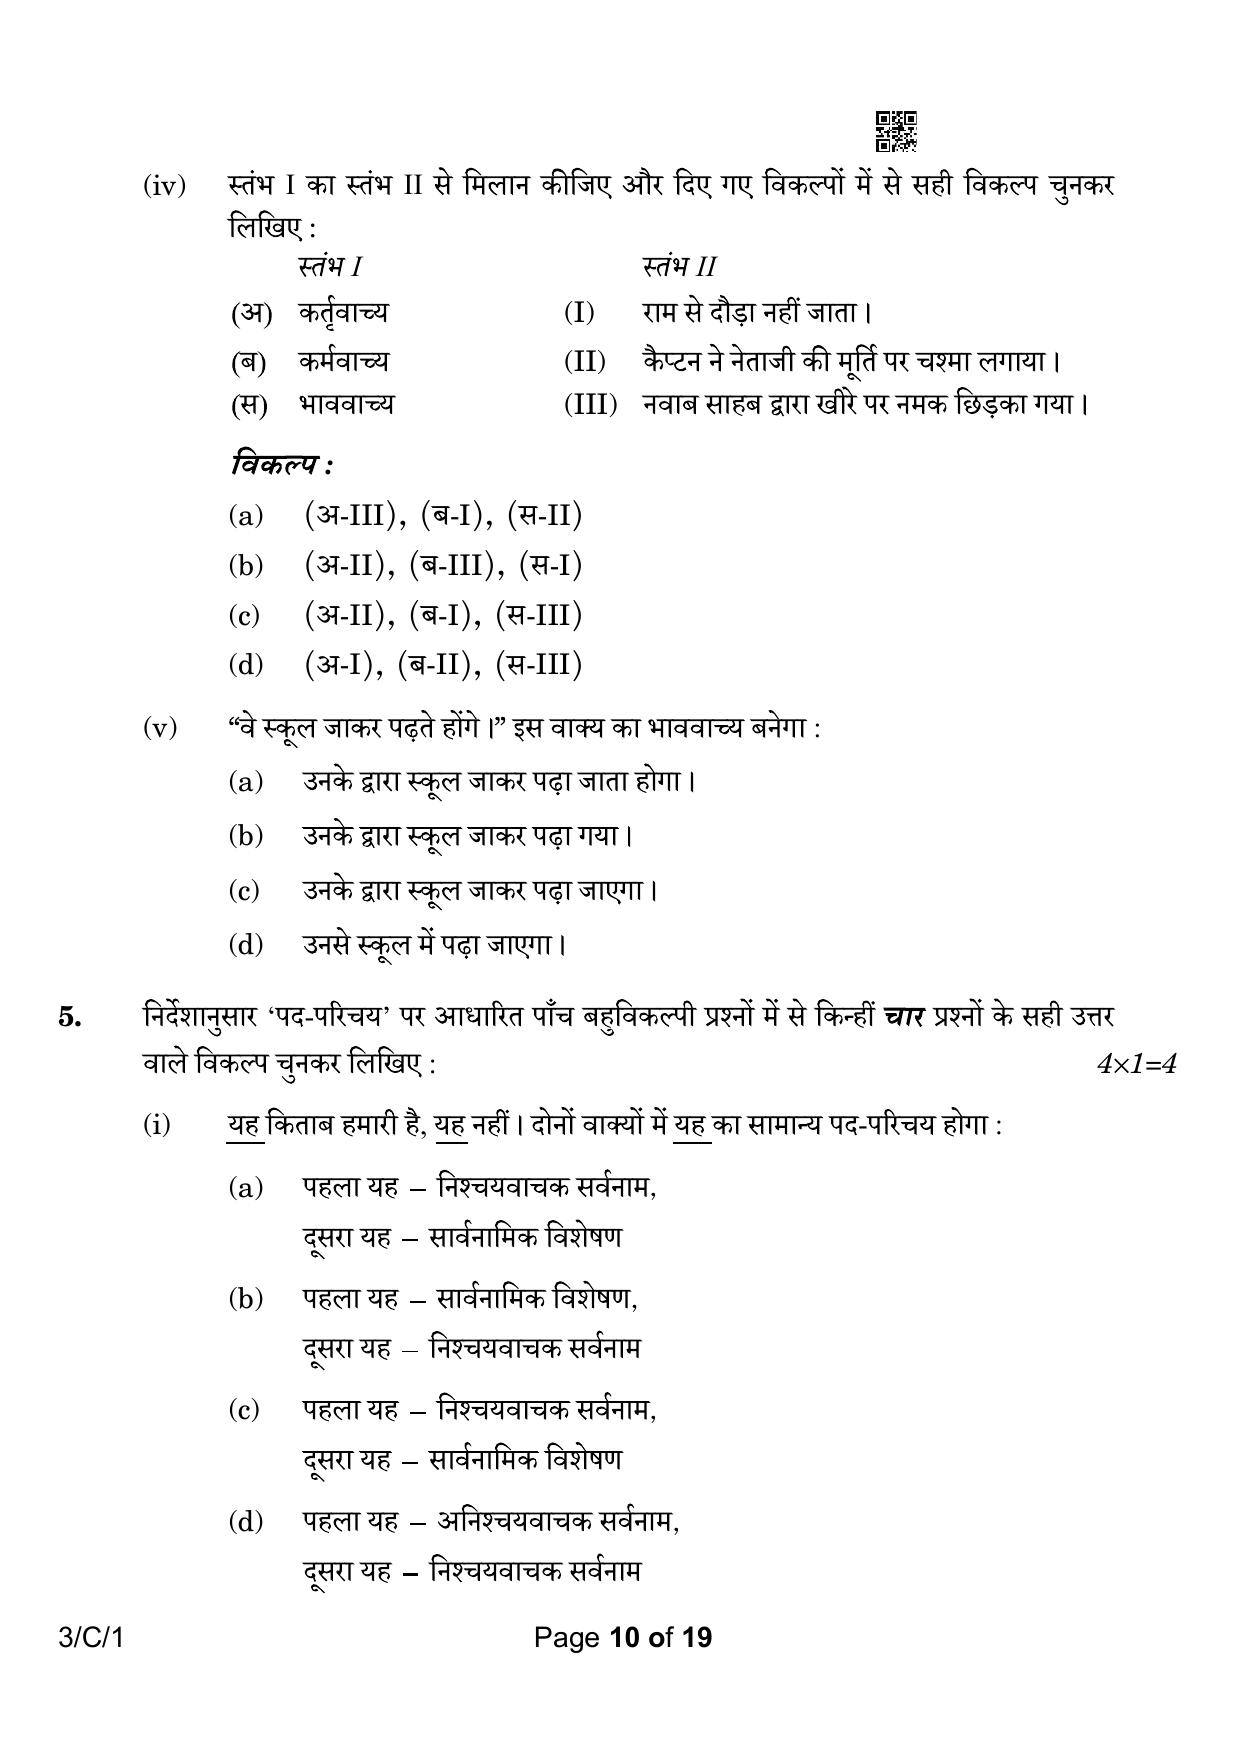 CBSE Class 10 3-1 Hindi A 2023 (Compartment) Question Paper - Page 10